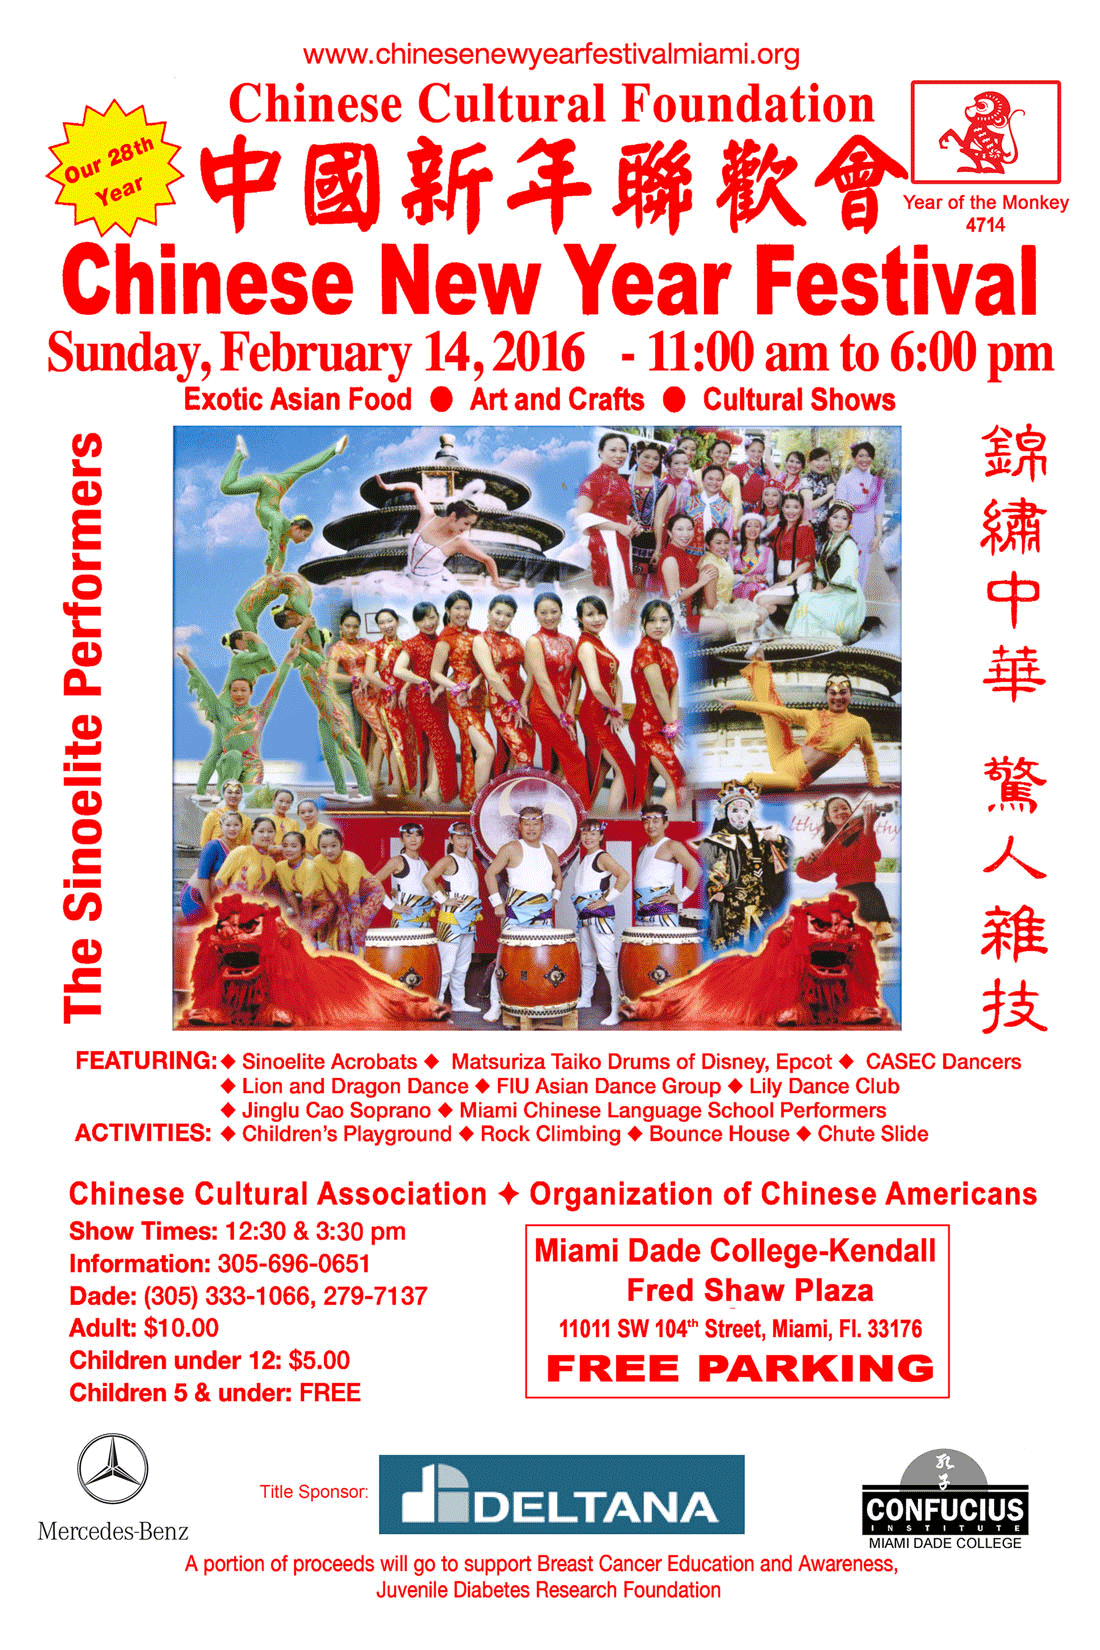 Chinese New Year in Miami